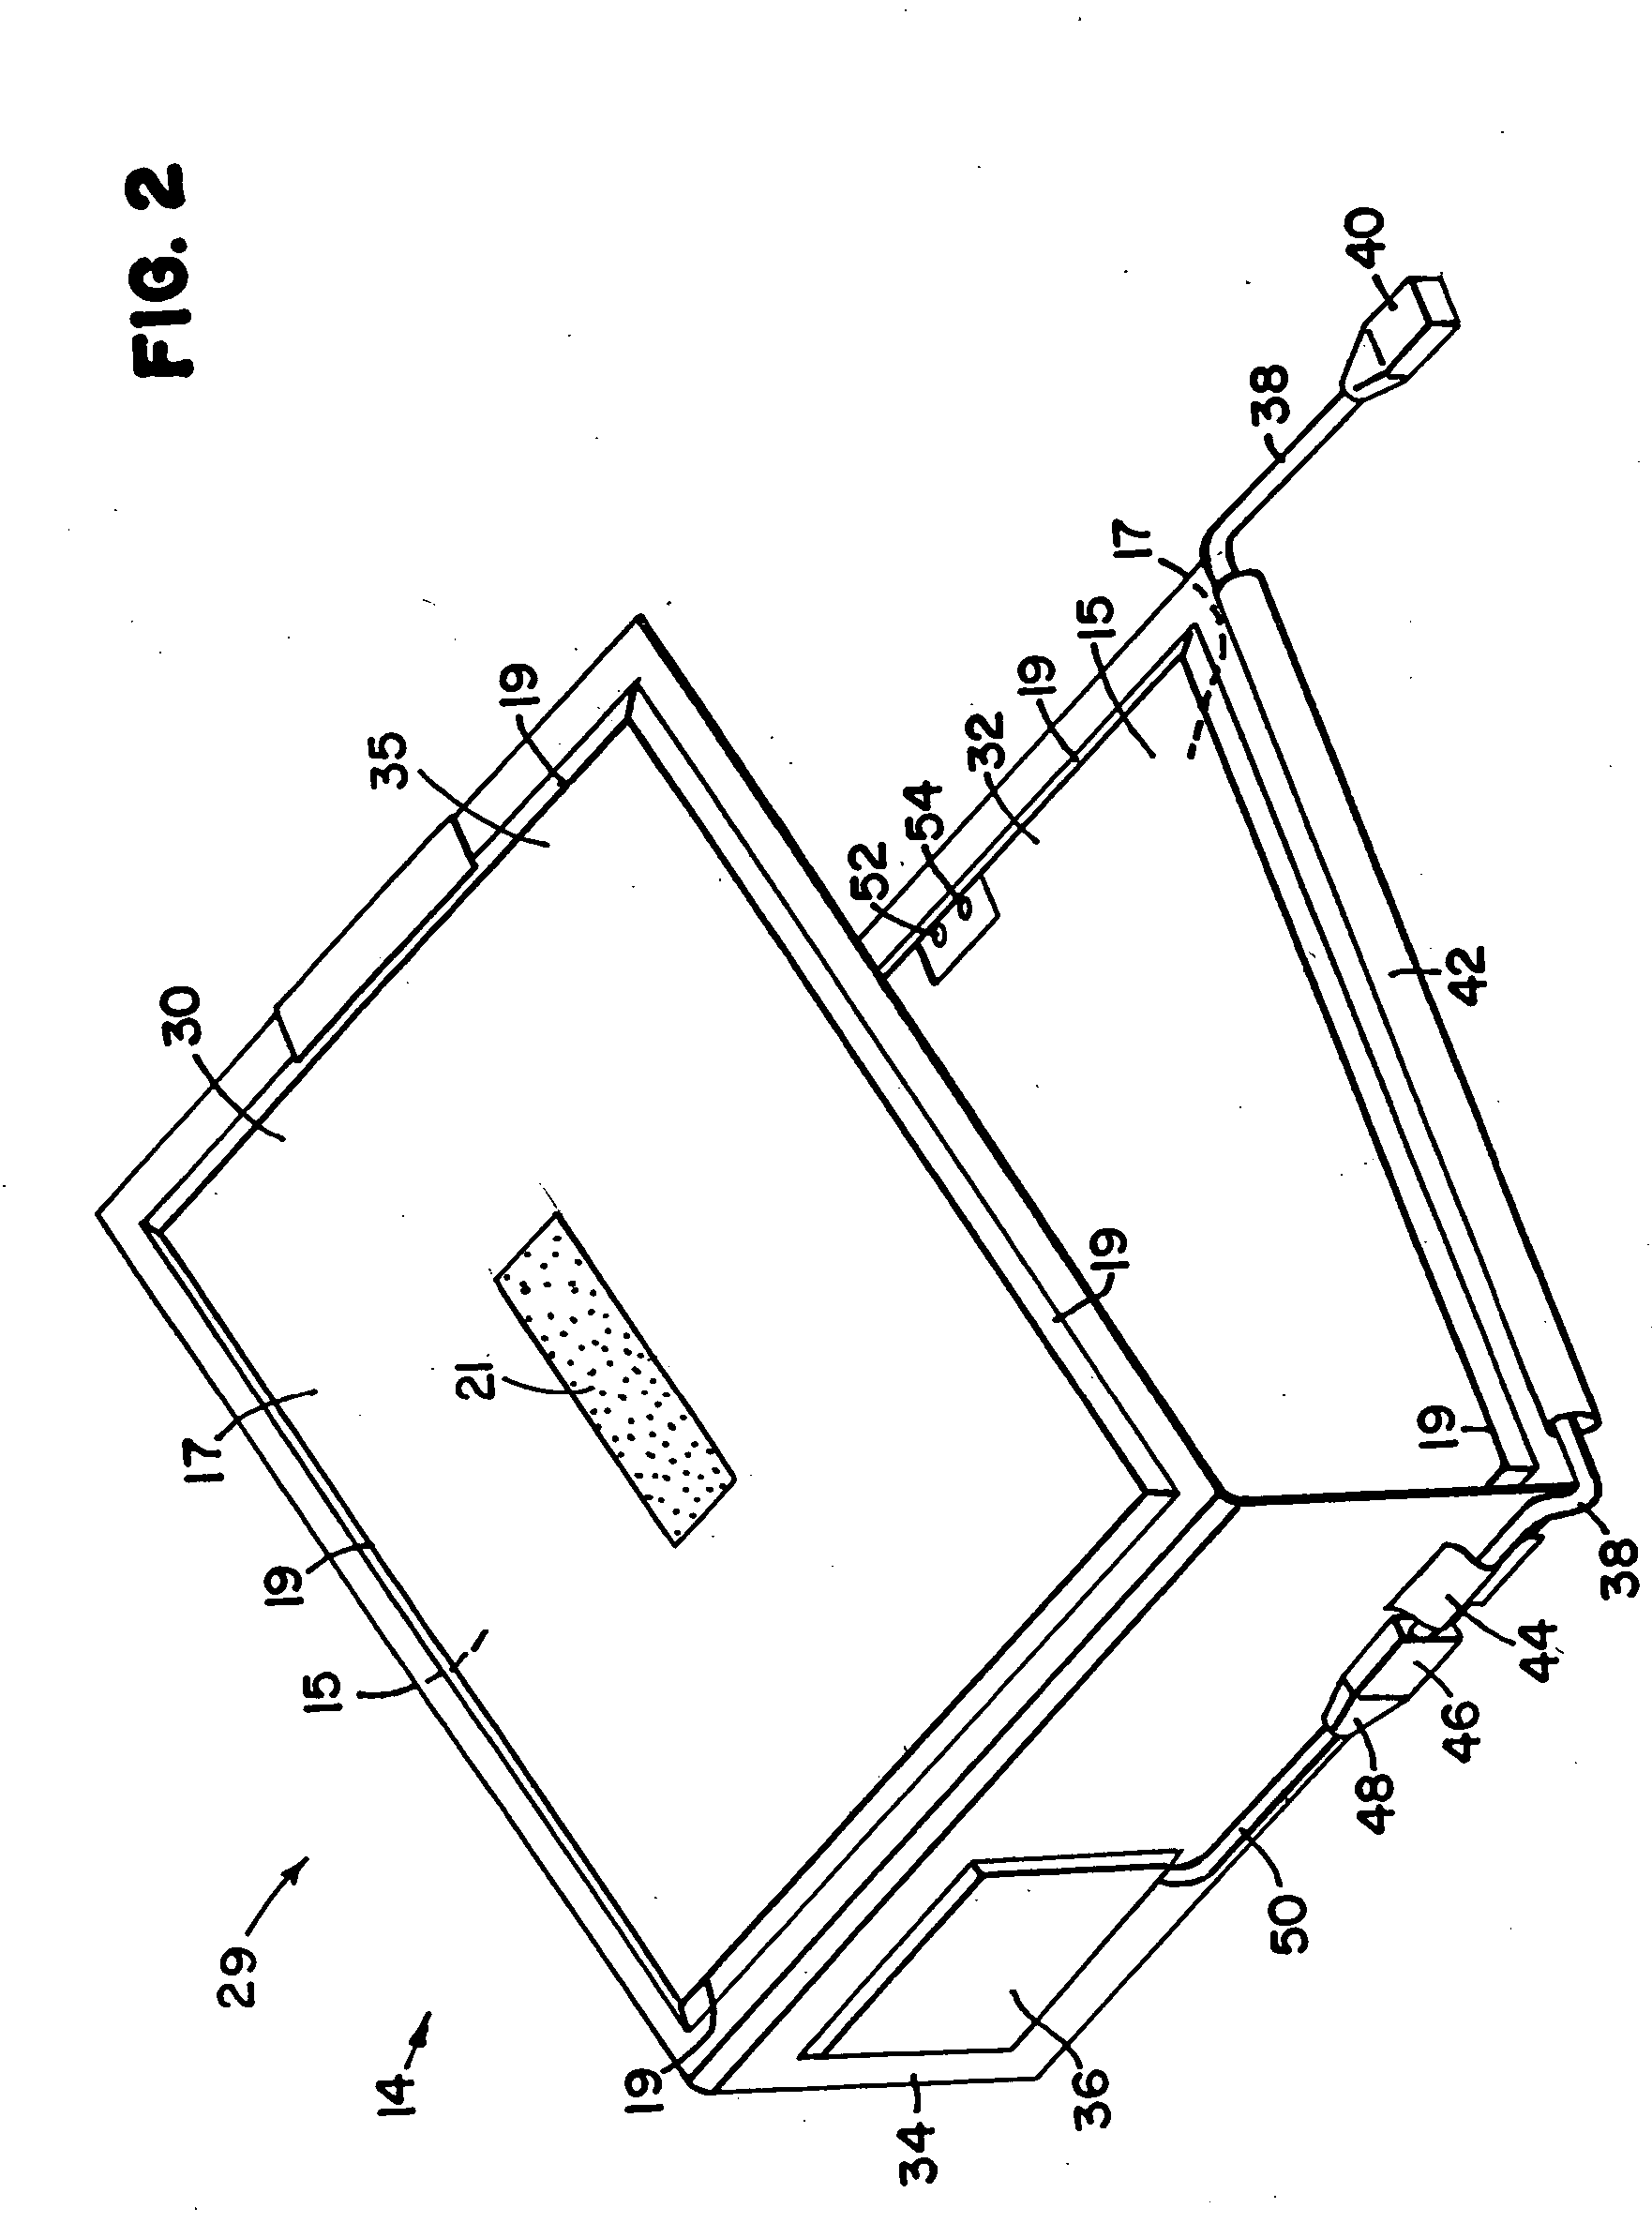 Apparatus and method for heated food delivery